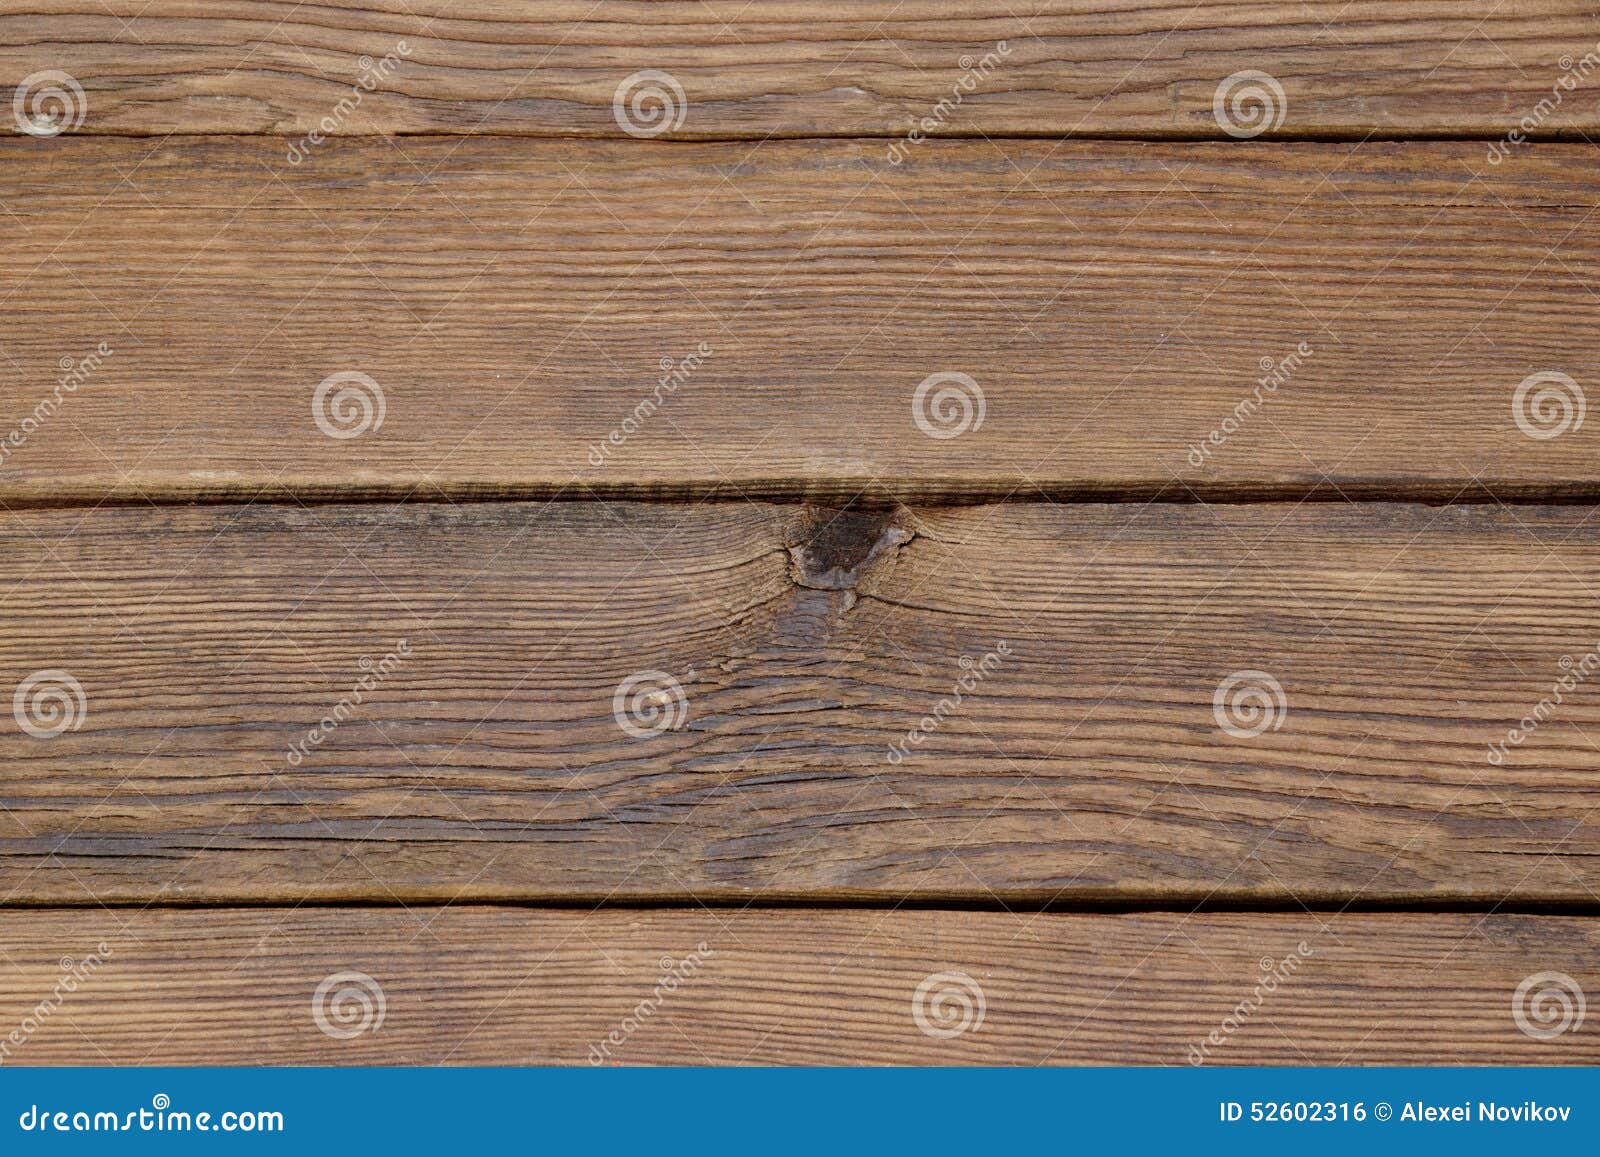 Brown Textured Old Wood Slats Panel Background Stock Photo - Image of